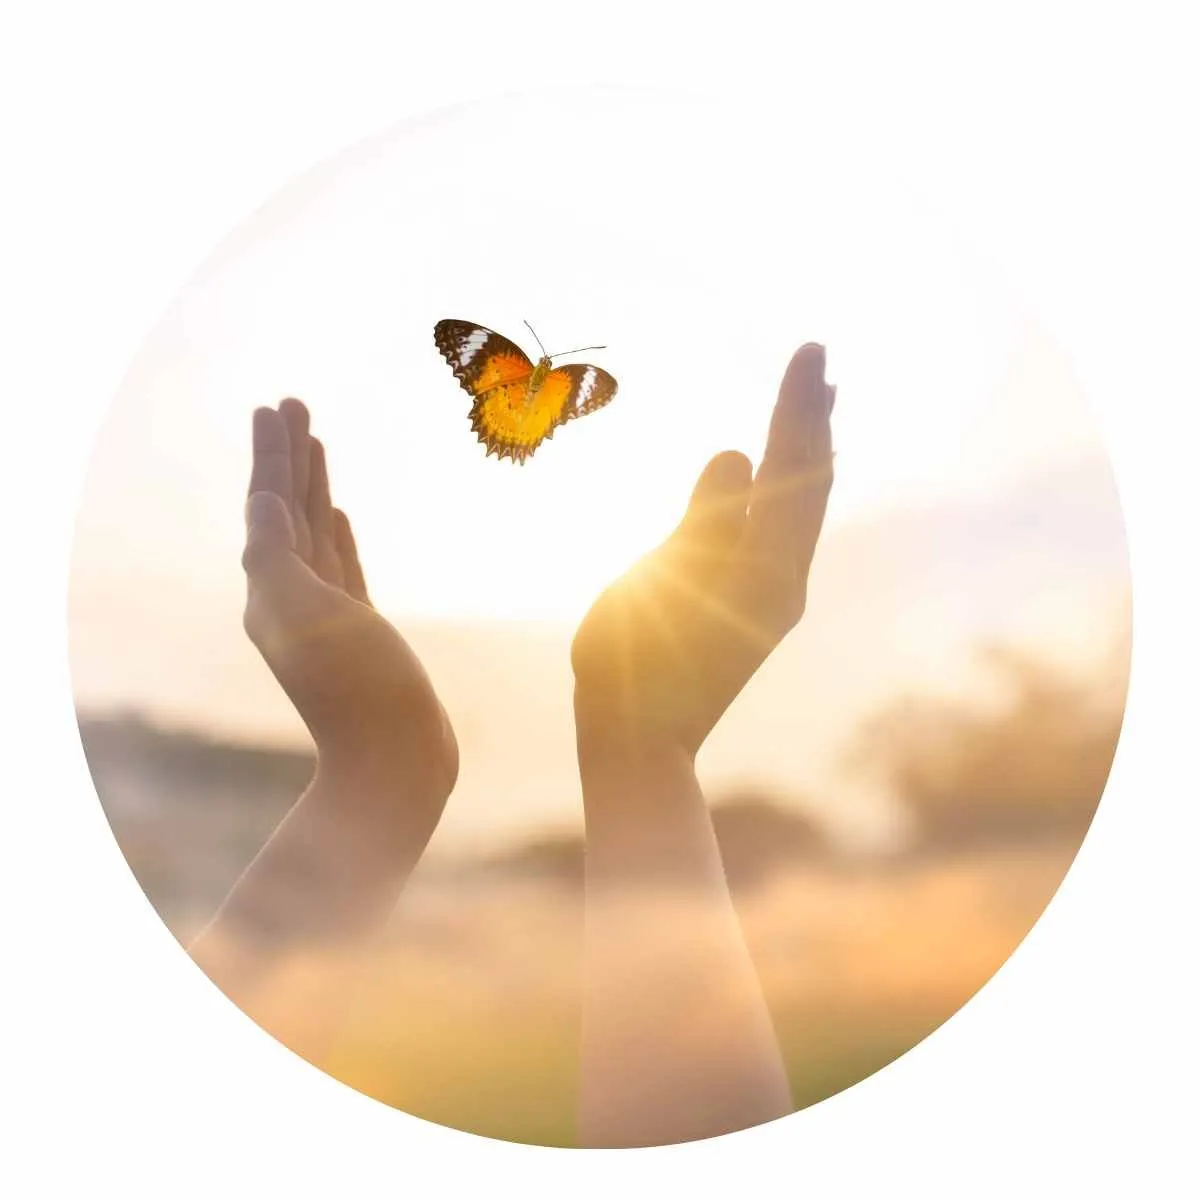 A butterfly leaving a hand